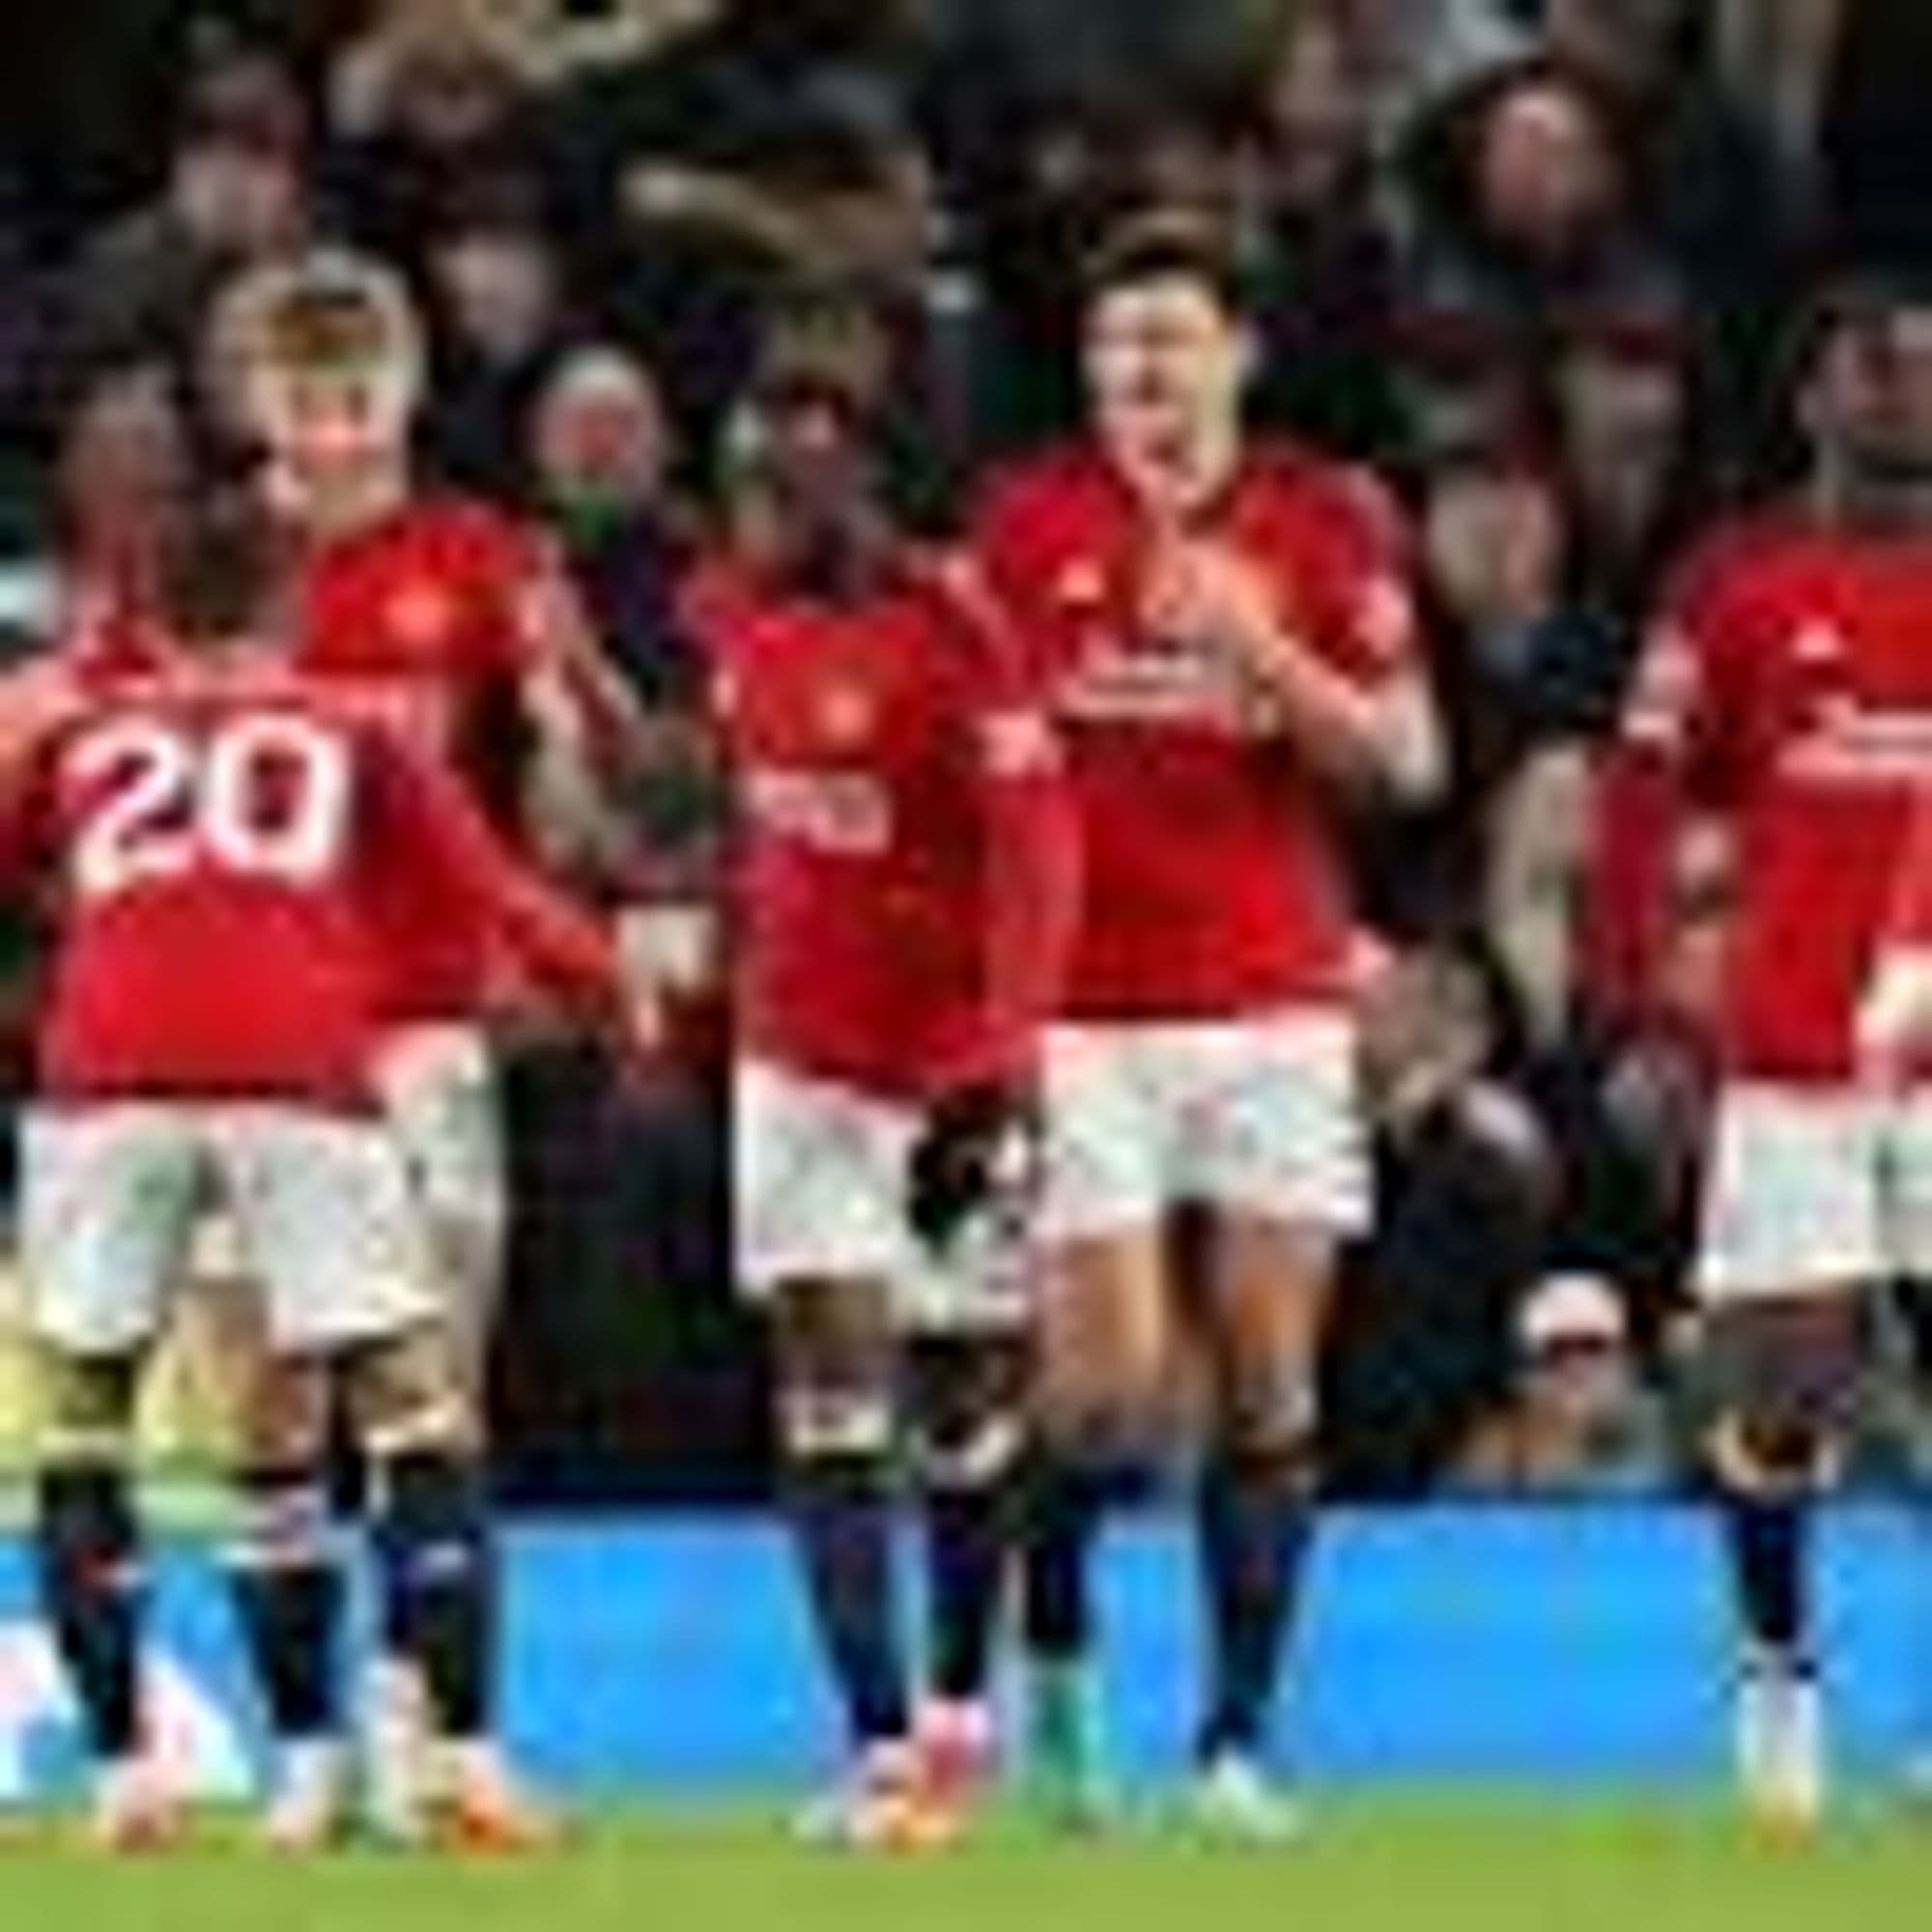 # Title: Manchester United Secures Victory with a Thrilling 4-2 Win Over Sheffield United